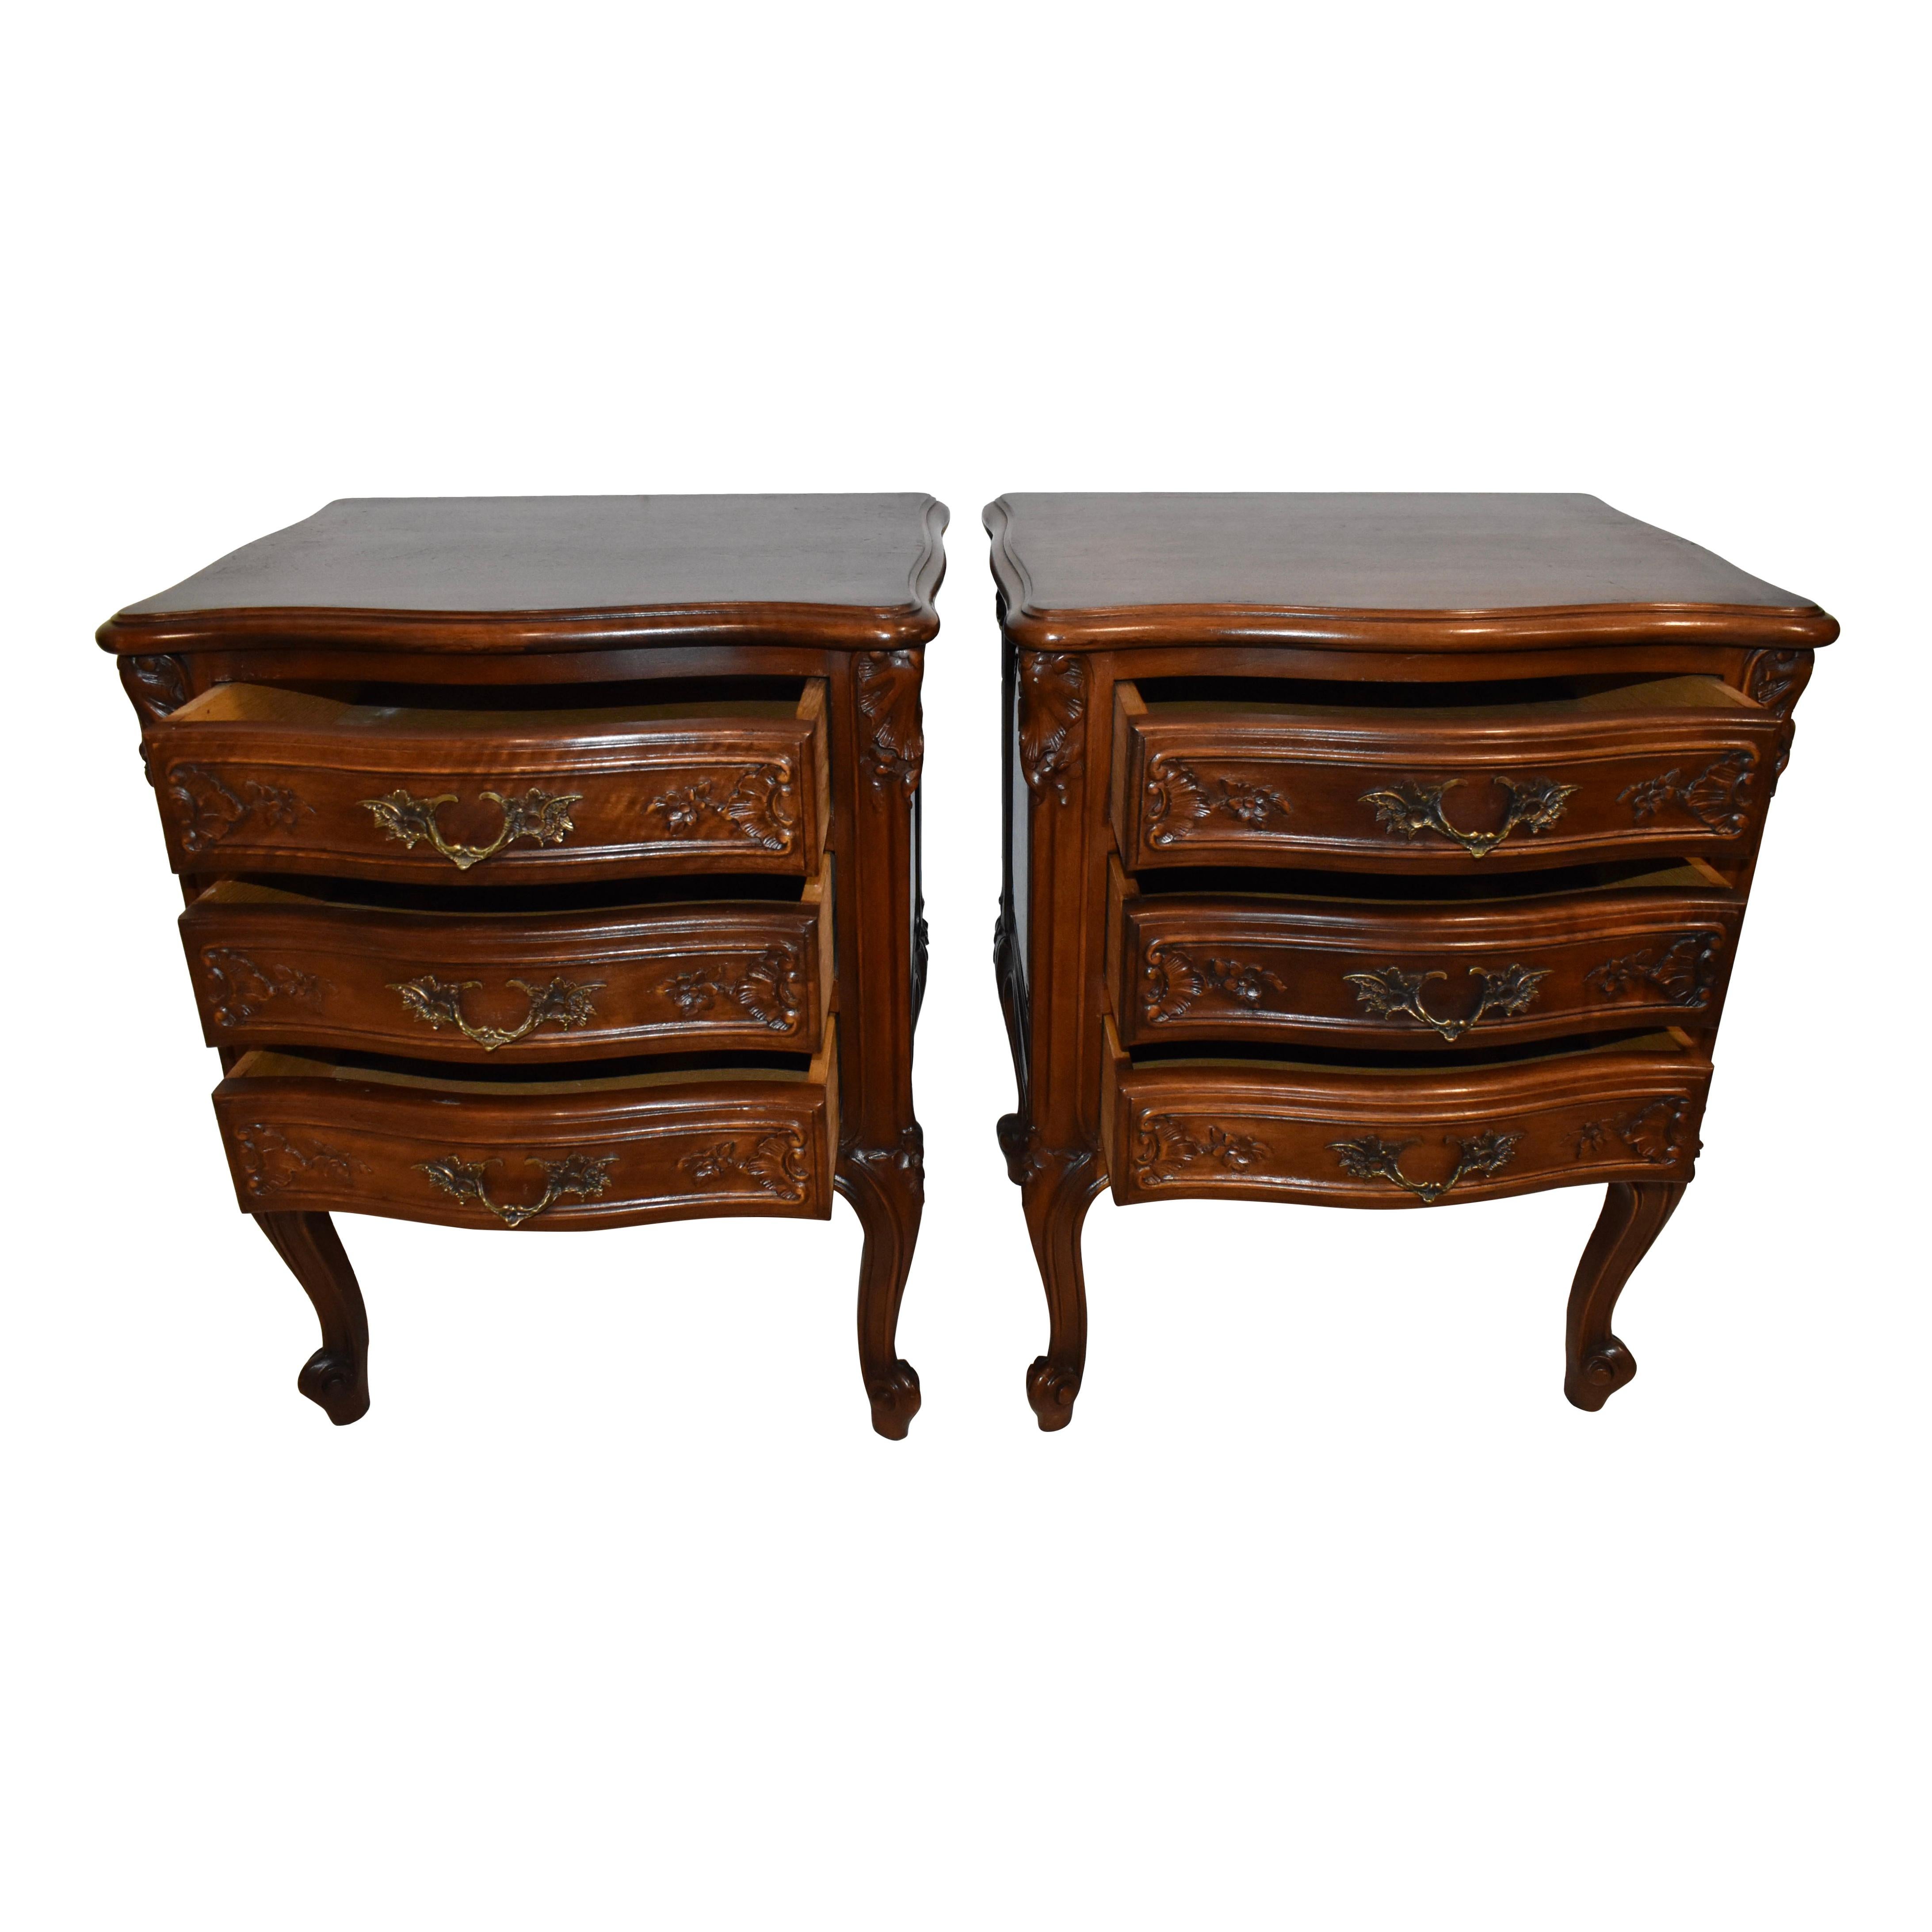 Small in stature but generous is detail and elegance, this pair of nightstands is crafted from walnut and finished with a medium stain that does not hide its luxurious, tight wood grain. Featuring beveled tops with serpentine fronts and sides over